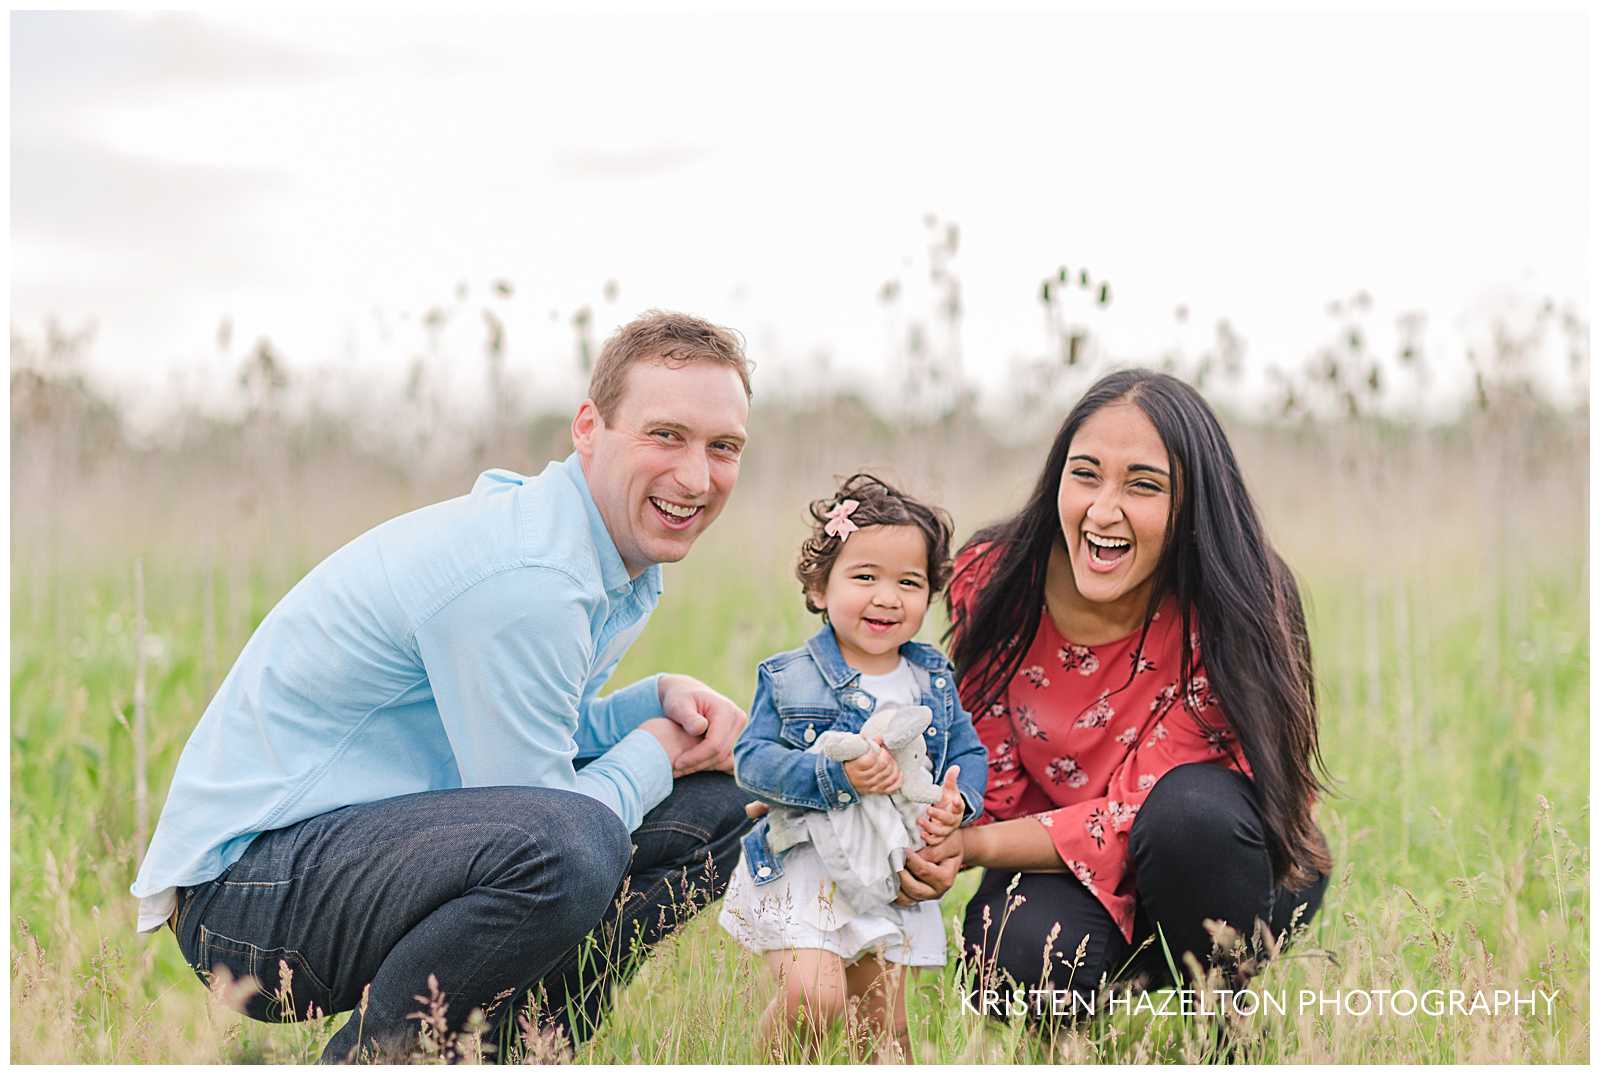 Young family of three crouching in a meadow by Forest Park, IL photographer Kristen Hazelton